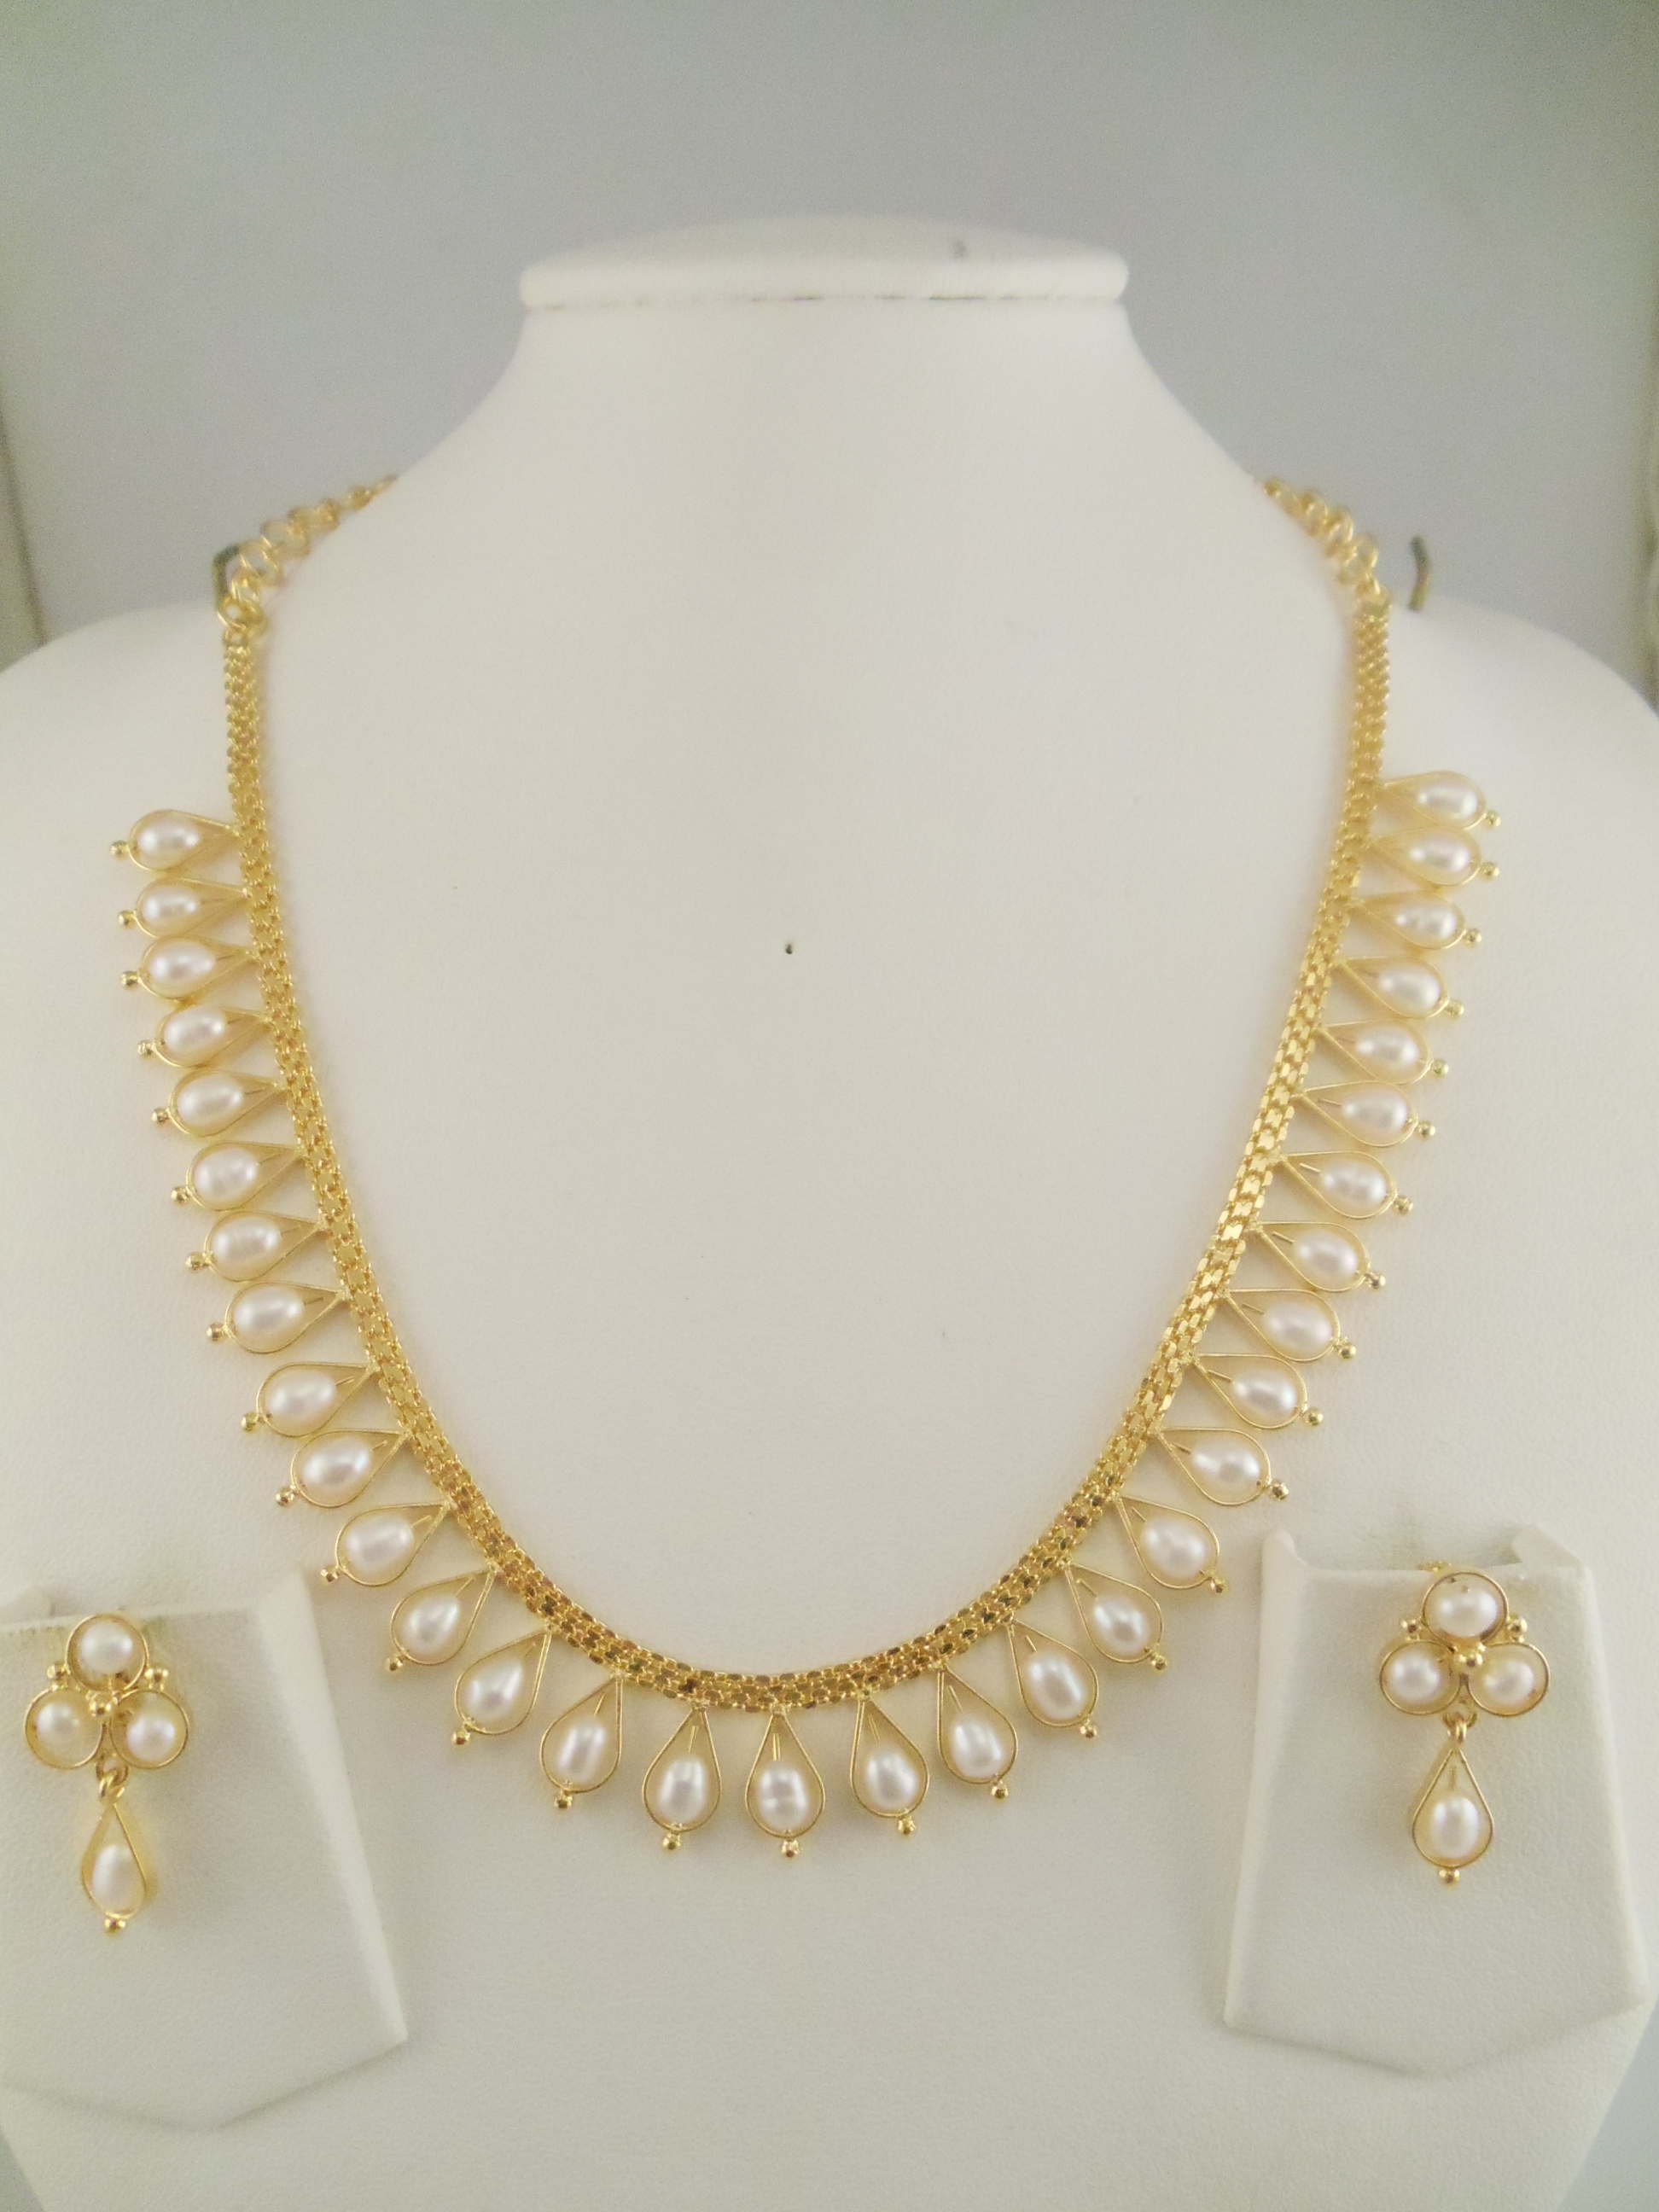 1gm Gold Jewelry Necklace Sets